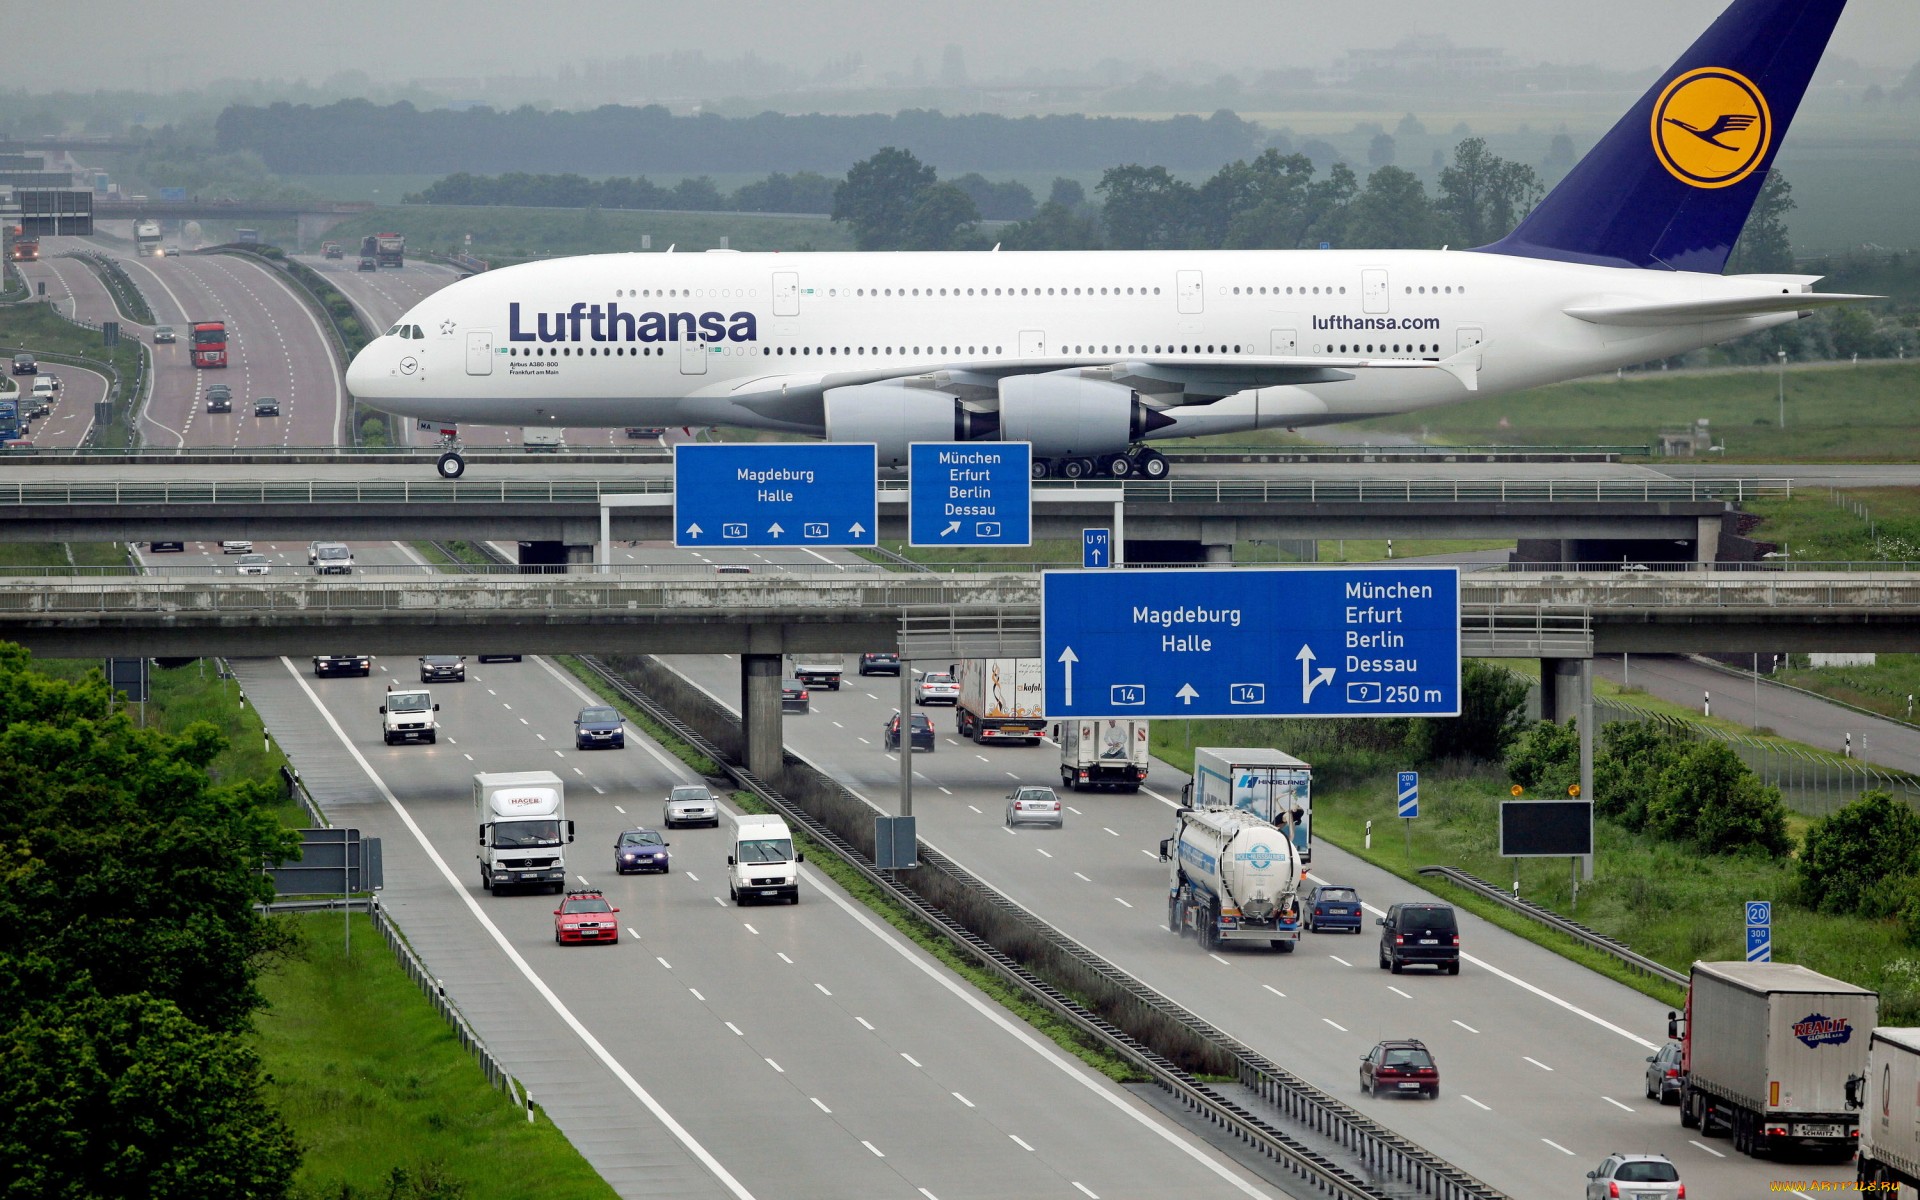 Wallpaper Download Airbus A380 Lufthansa - Airplane On The Road , HD Wallpaper & Backgrounds